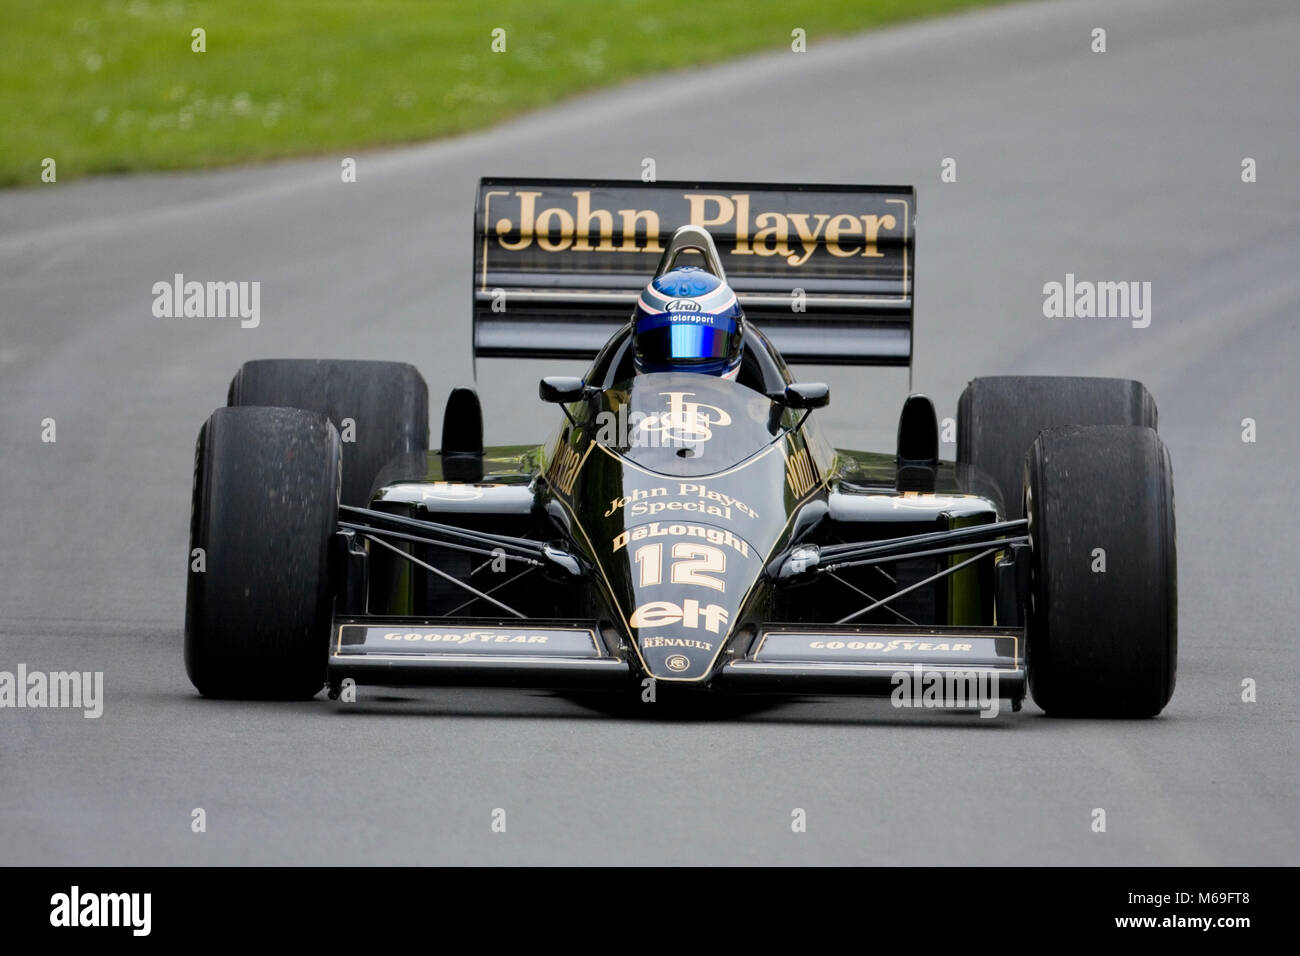 Black John Player Special Lotus F1 voiture, Shelsley Walsh Hill Climb, 2009 Banque D'Images